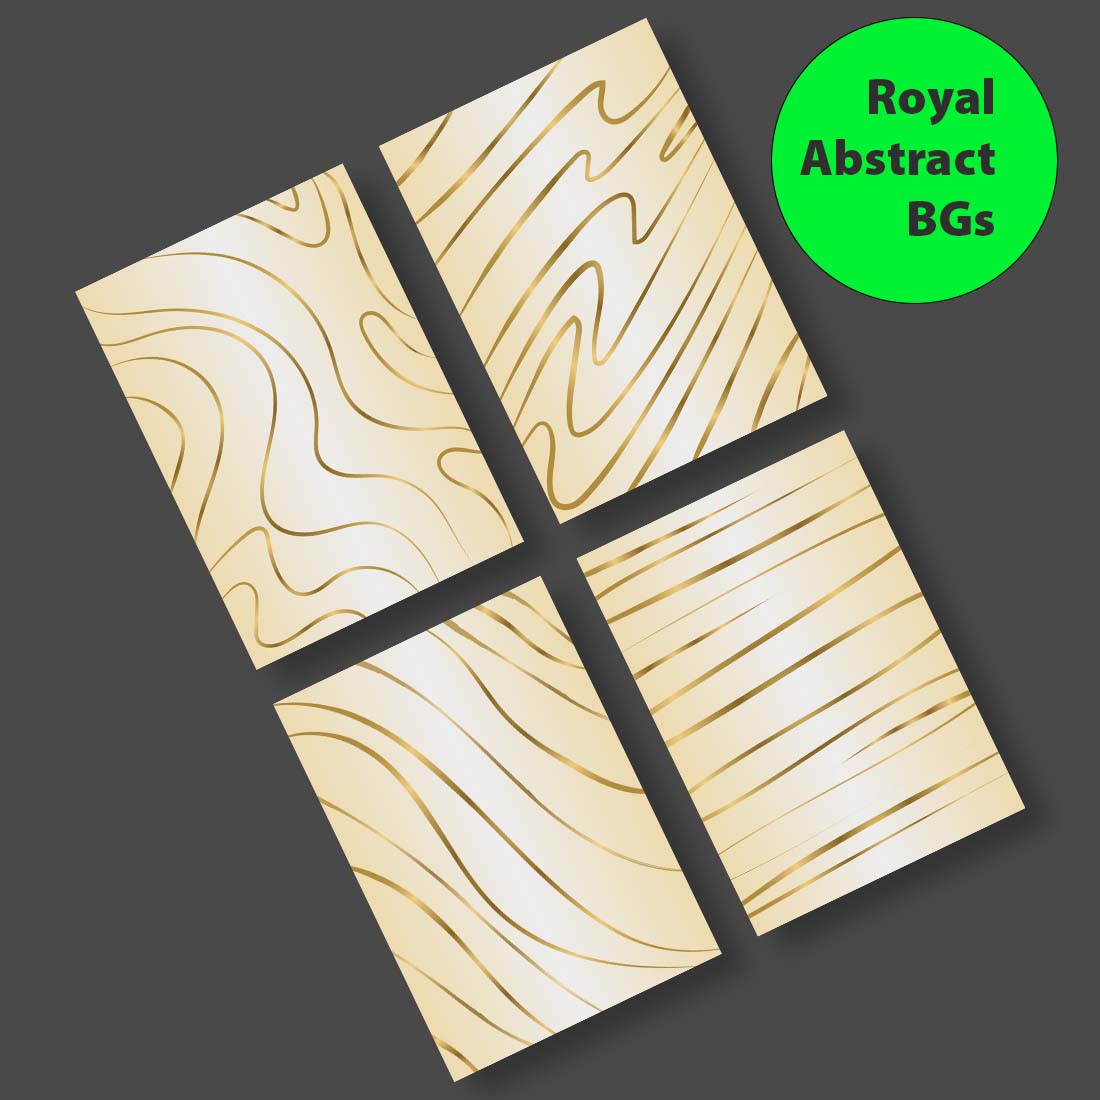 Royal Abstract Backgrounds Vector